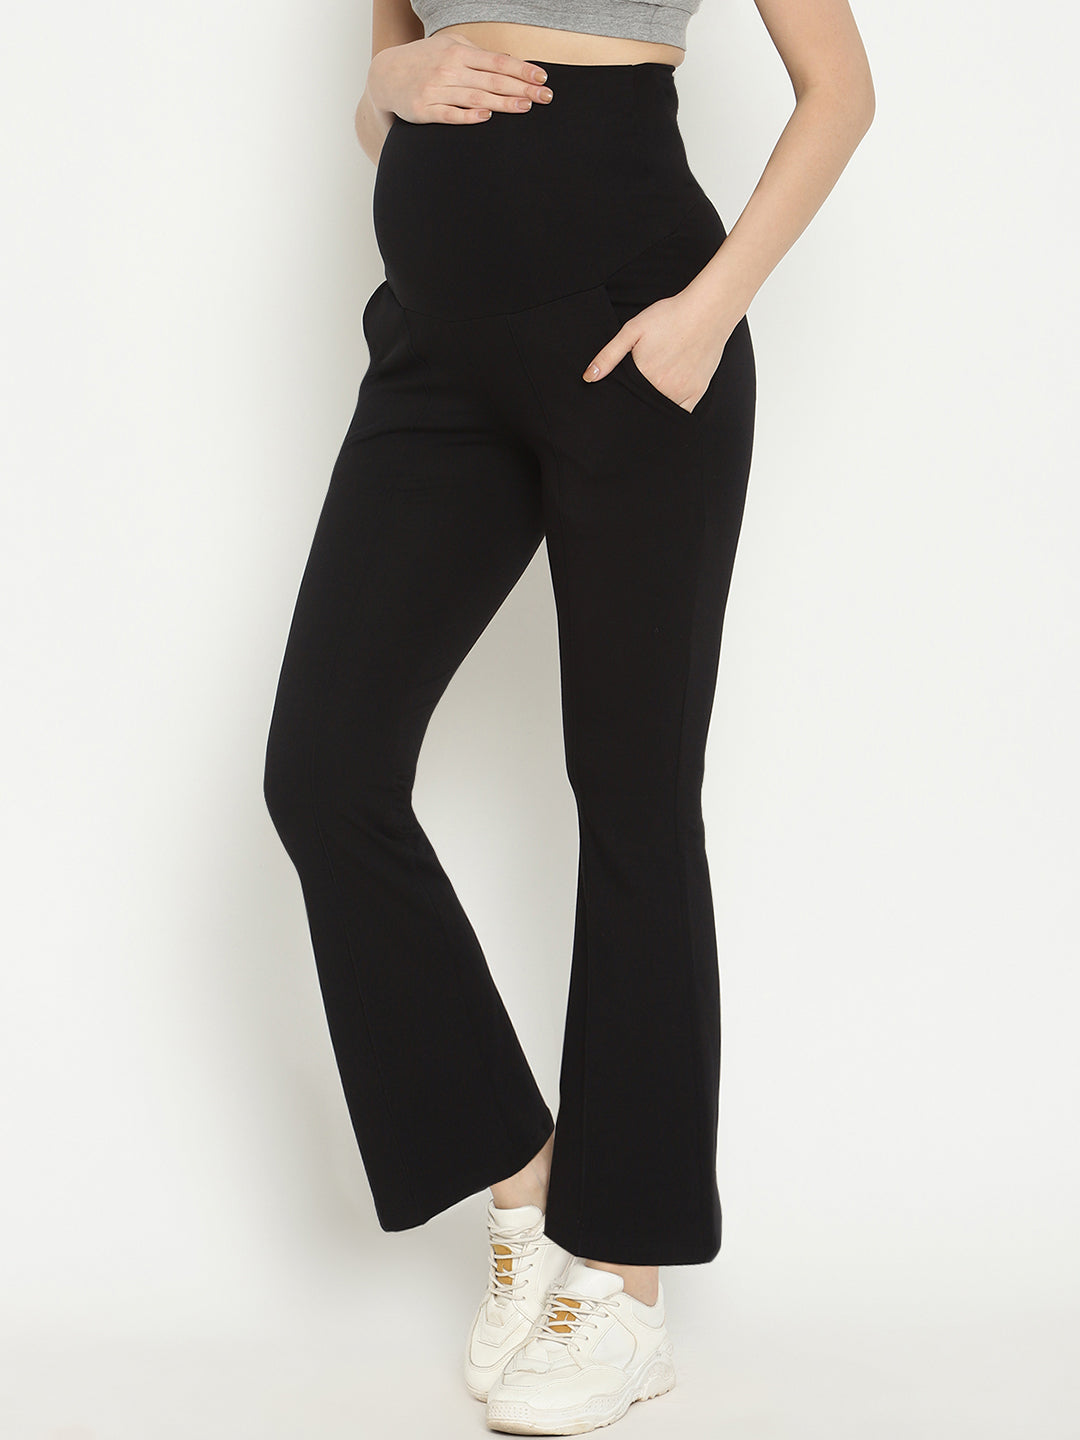 Over the Bump Cotton Flare Maternity Pants - Navy Blue | Umstandsleggings